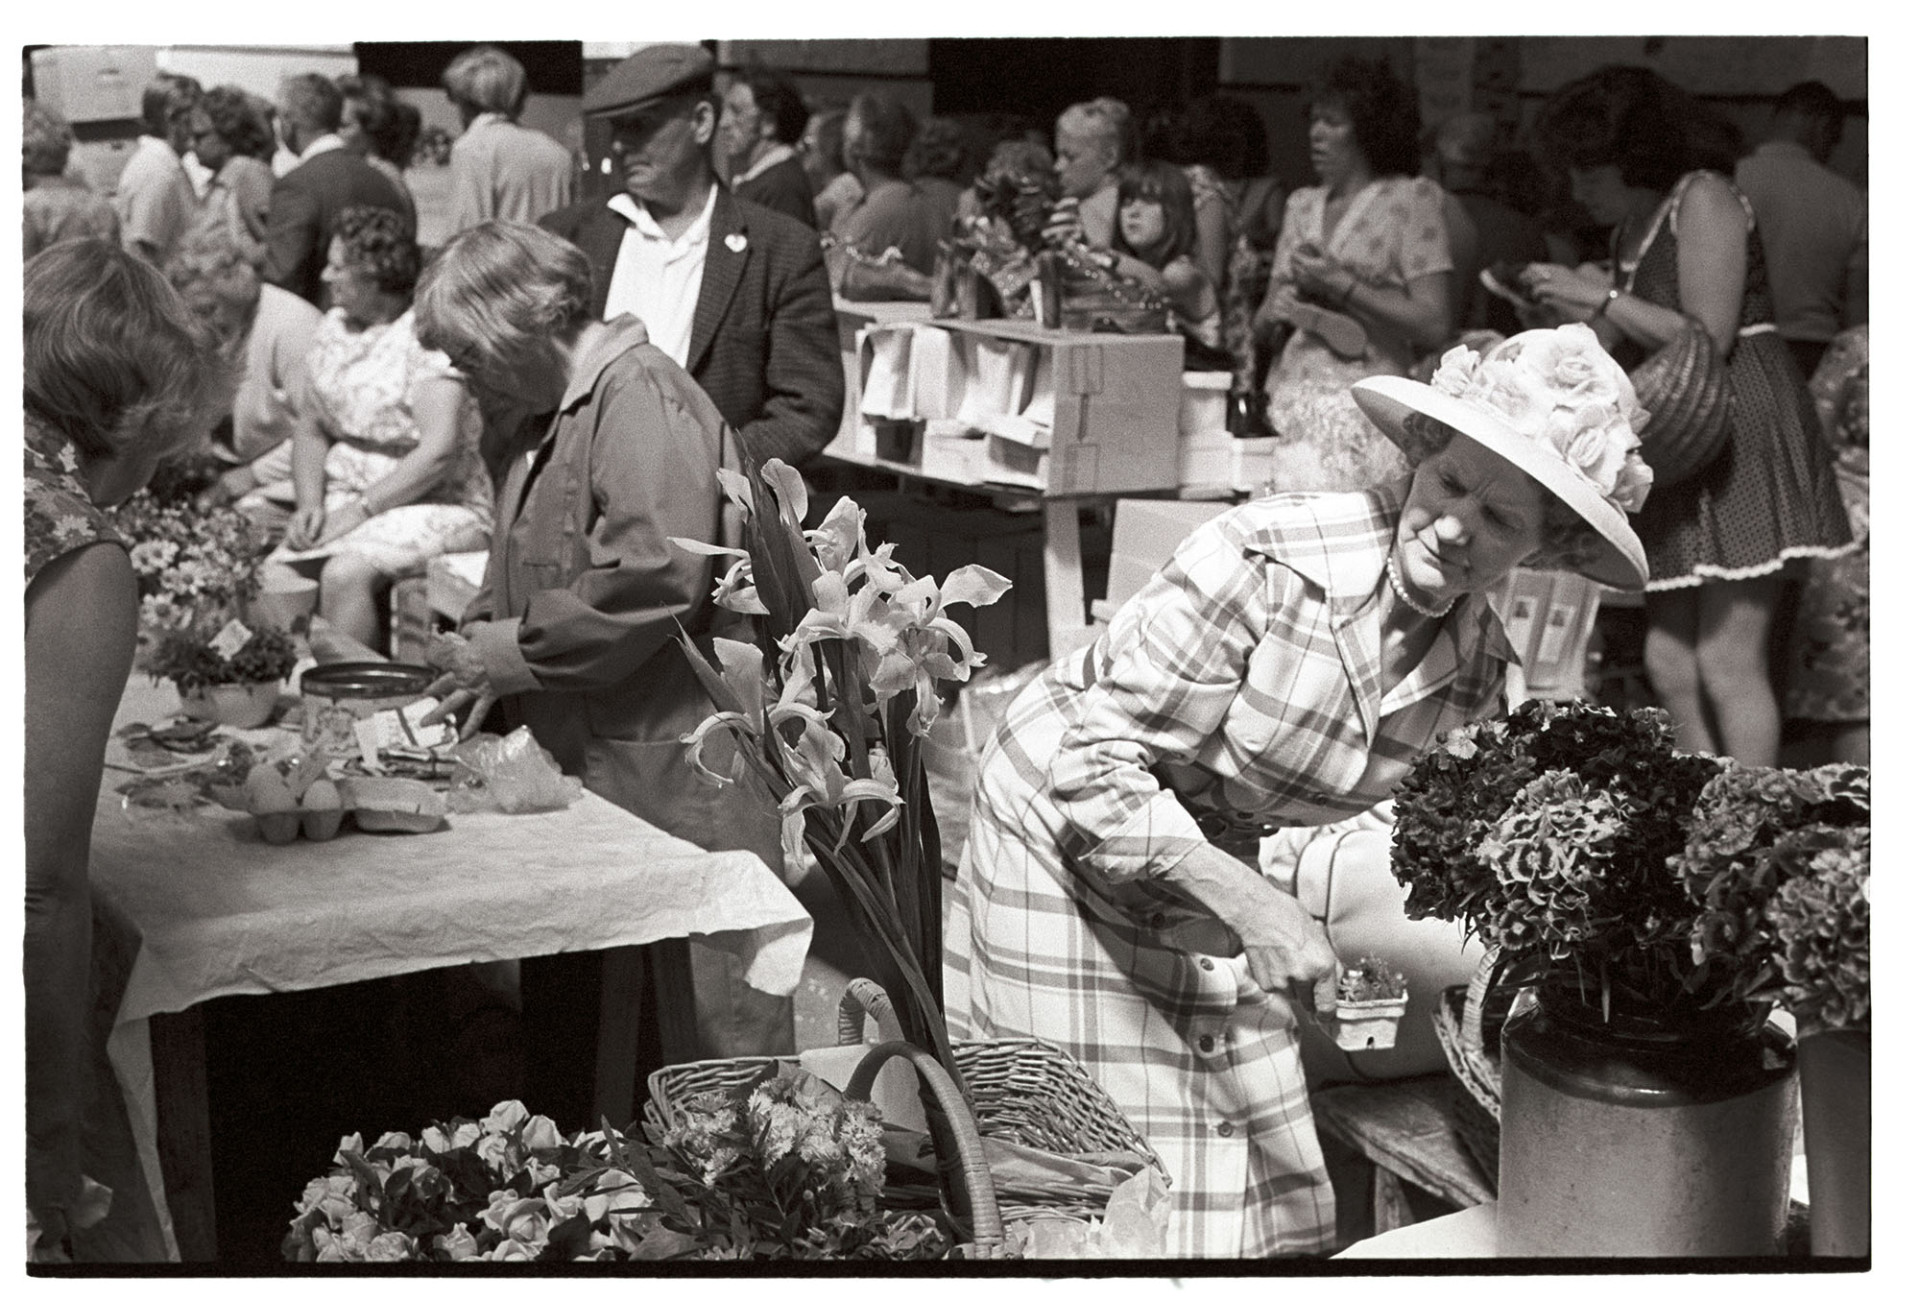 Flower stall at pannier market, woman in flowery hat.
[People shopping in Barnstaple Pannier Market. A woman wearing a hat with flowers is running a flower stall at the market.]